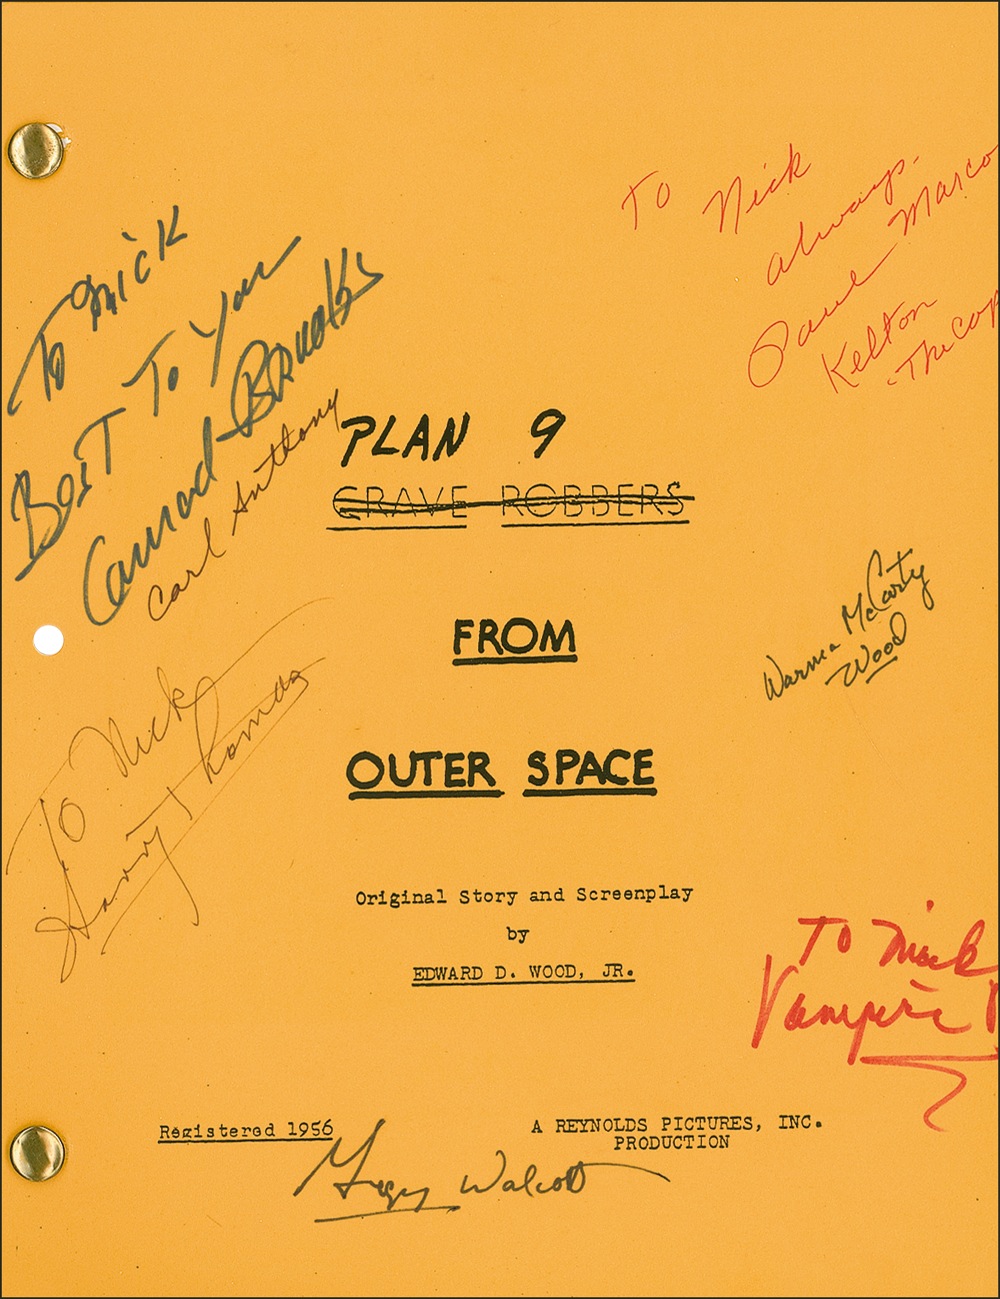 Lot #971 Plan 9 from Outer Space